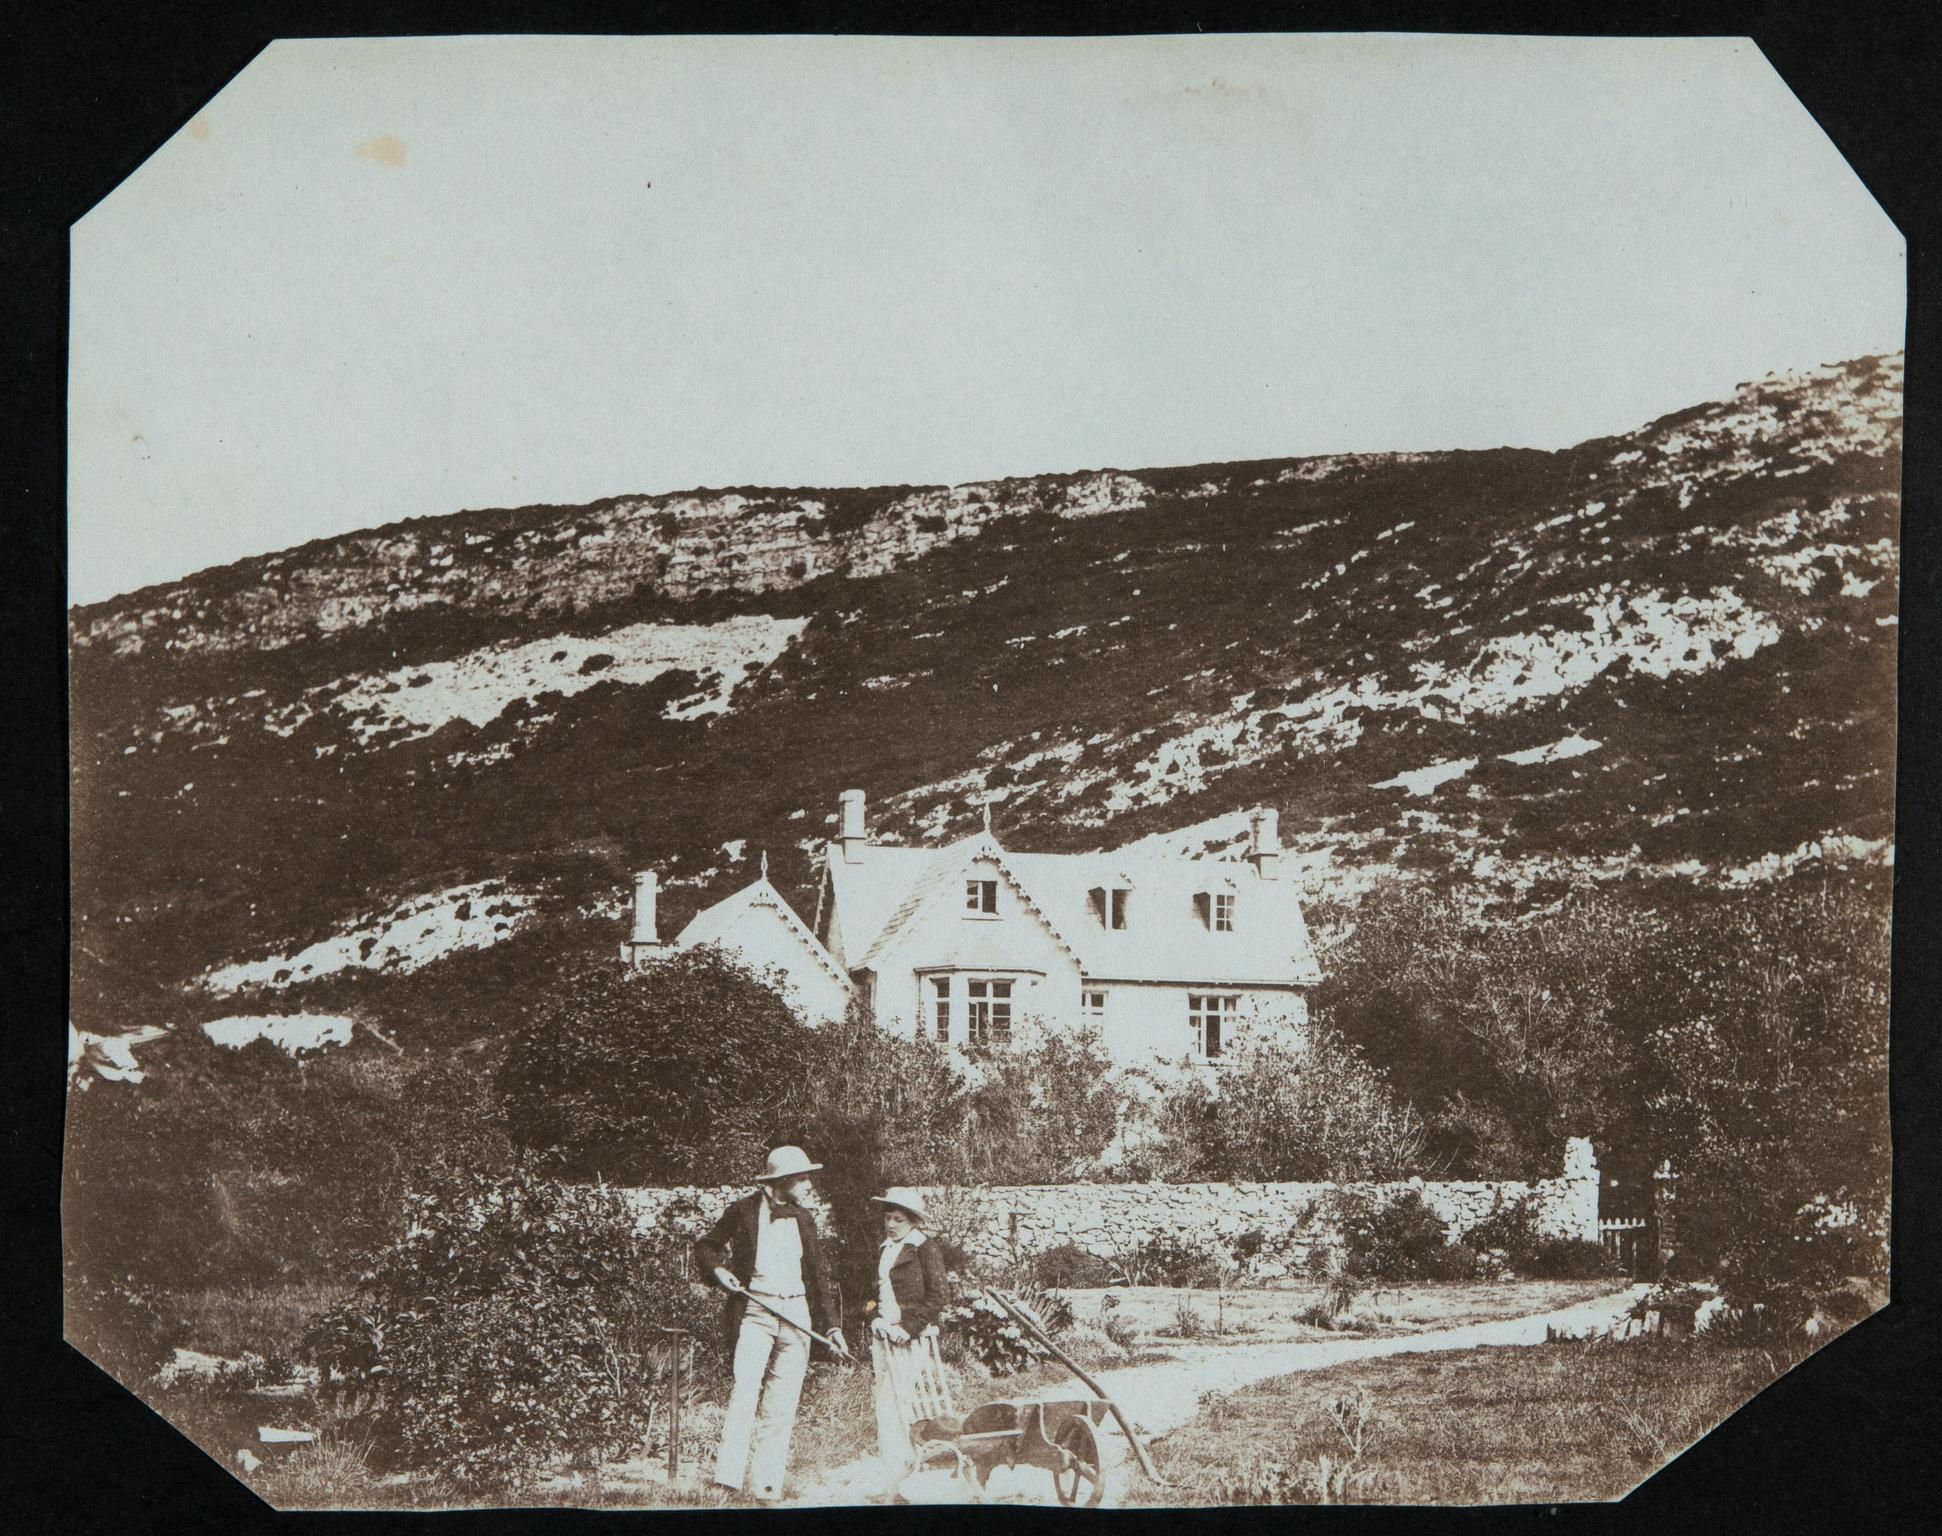 Cottage, Caswell Bay near Swansea, photograph